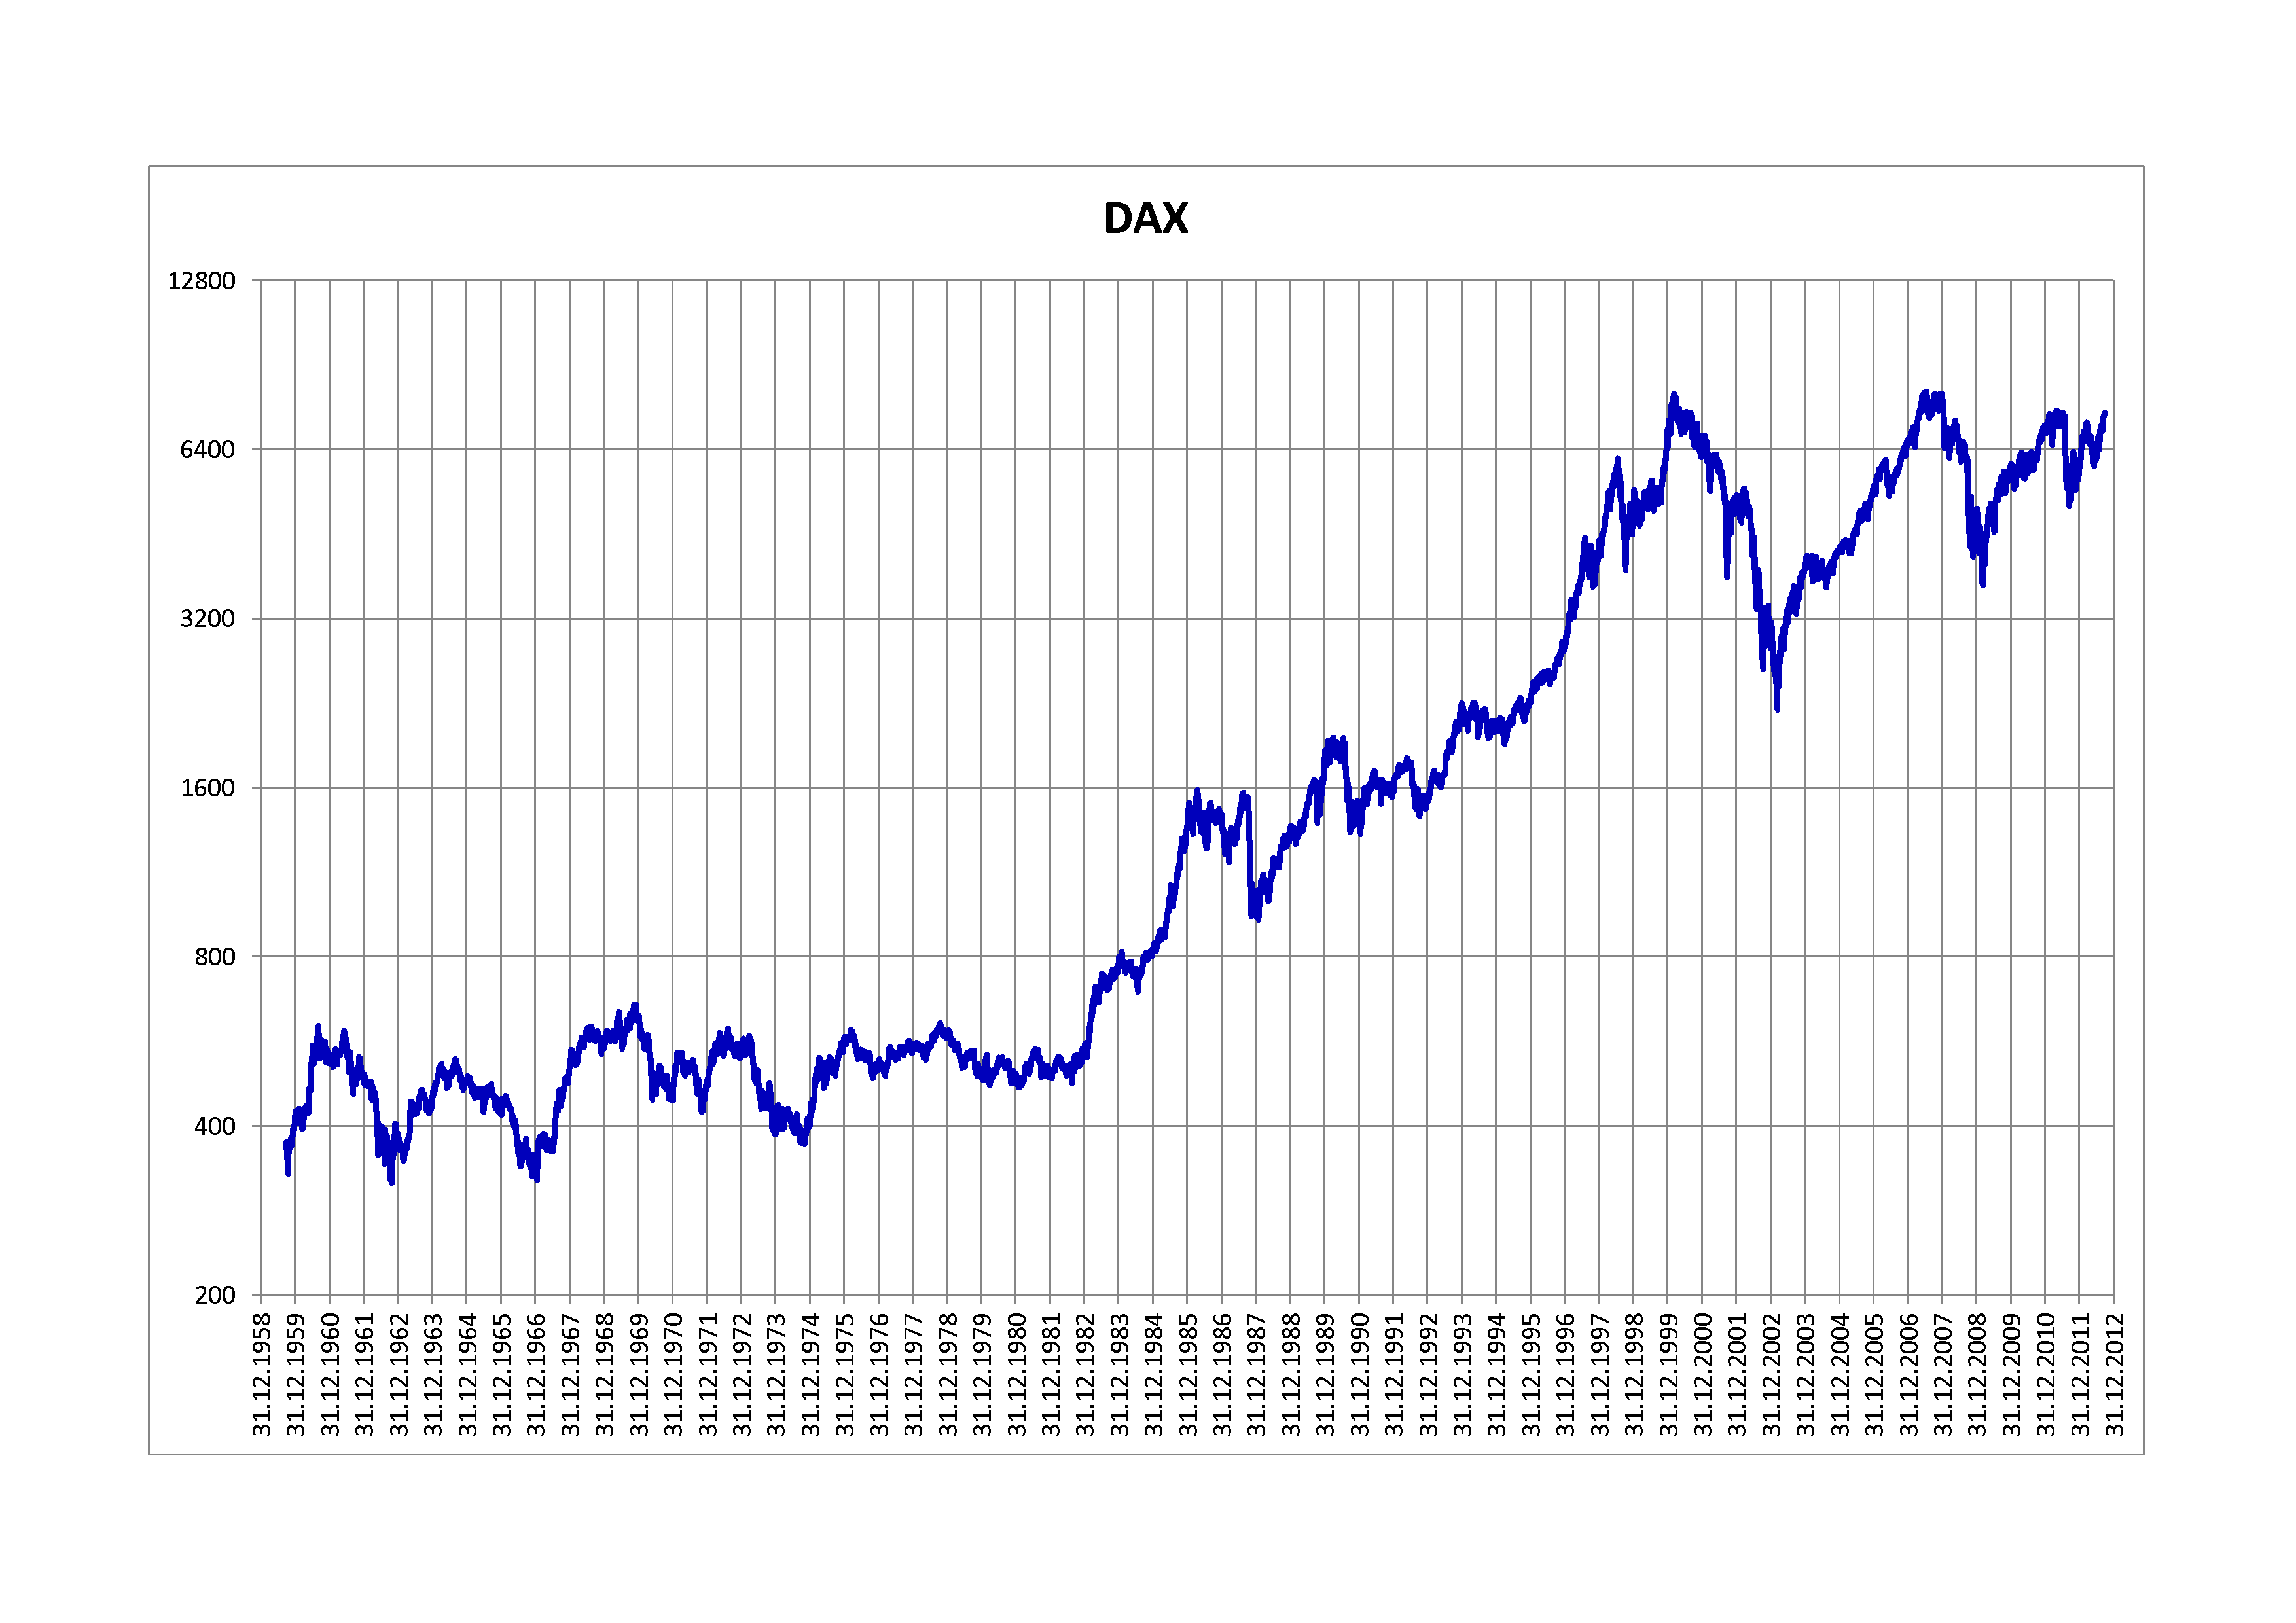 DAX Index Returns By Year From 1955 To 2012 | TopForeignStocks.com3508 x 2480